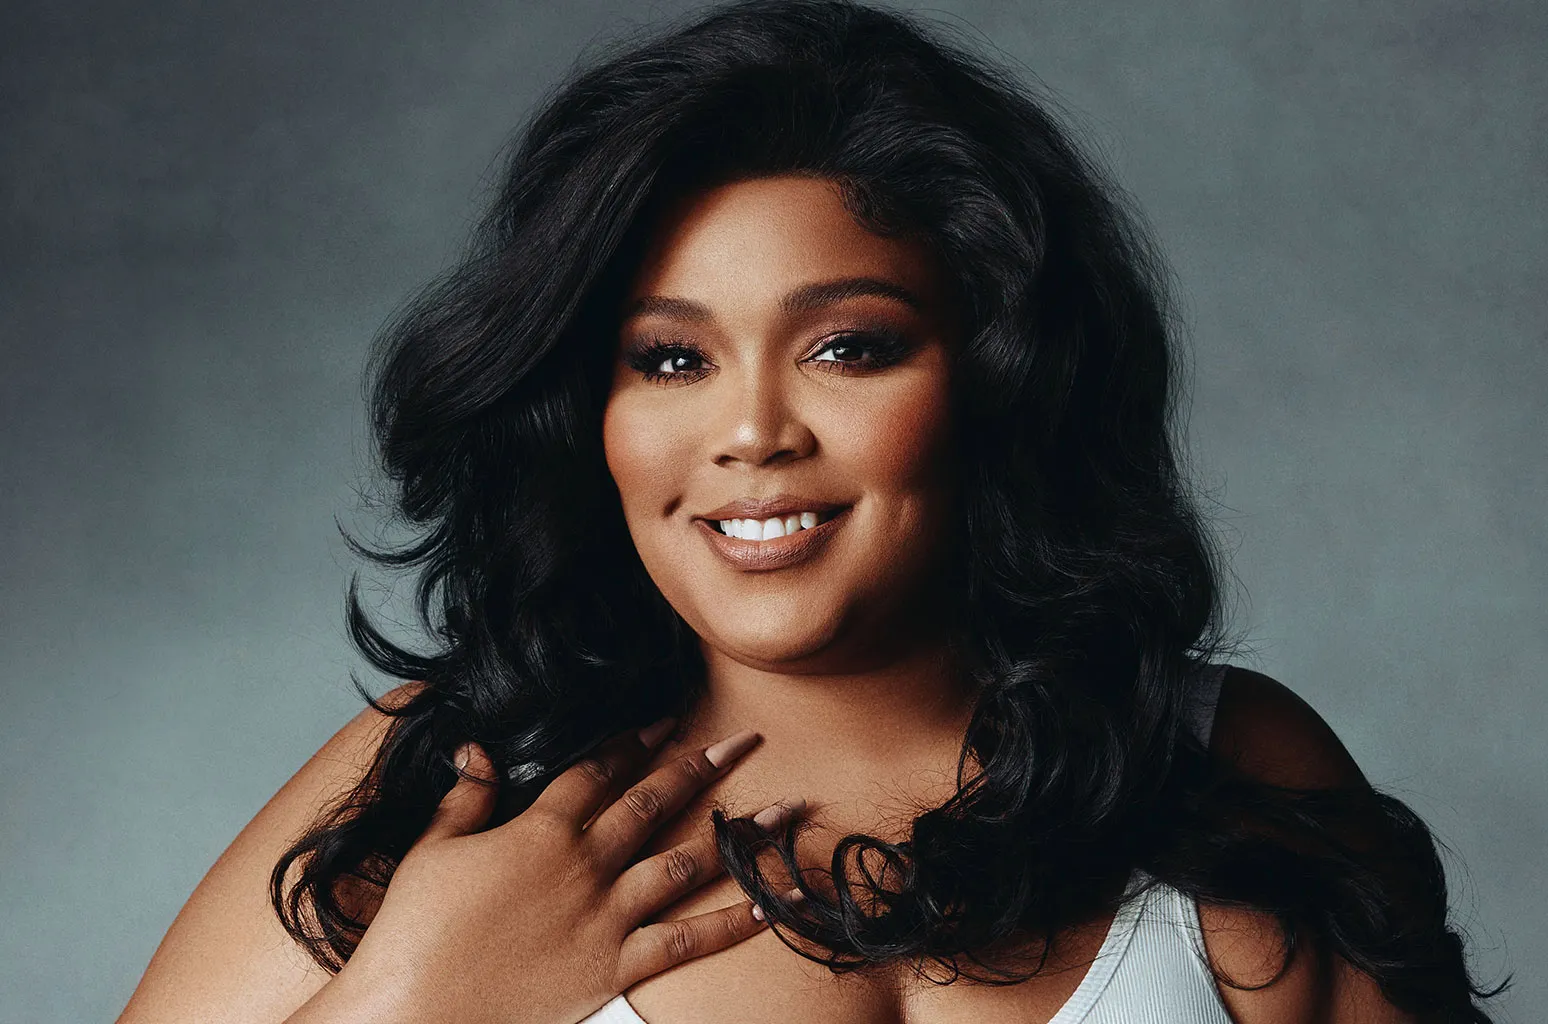 Lizzo's Message of Self-Love and Empowerment